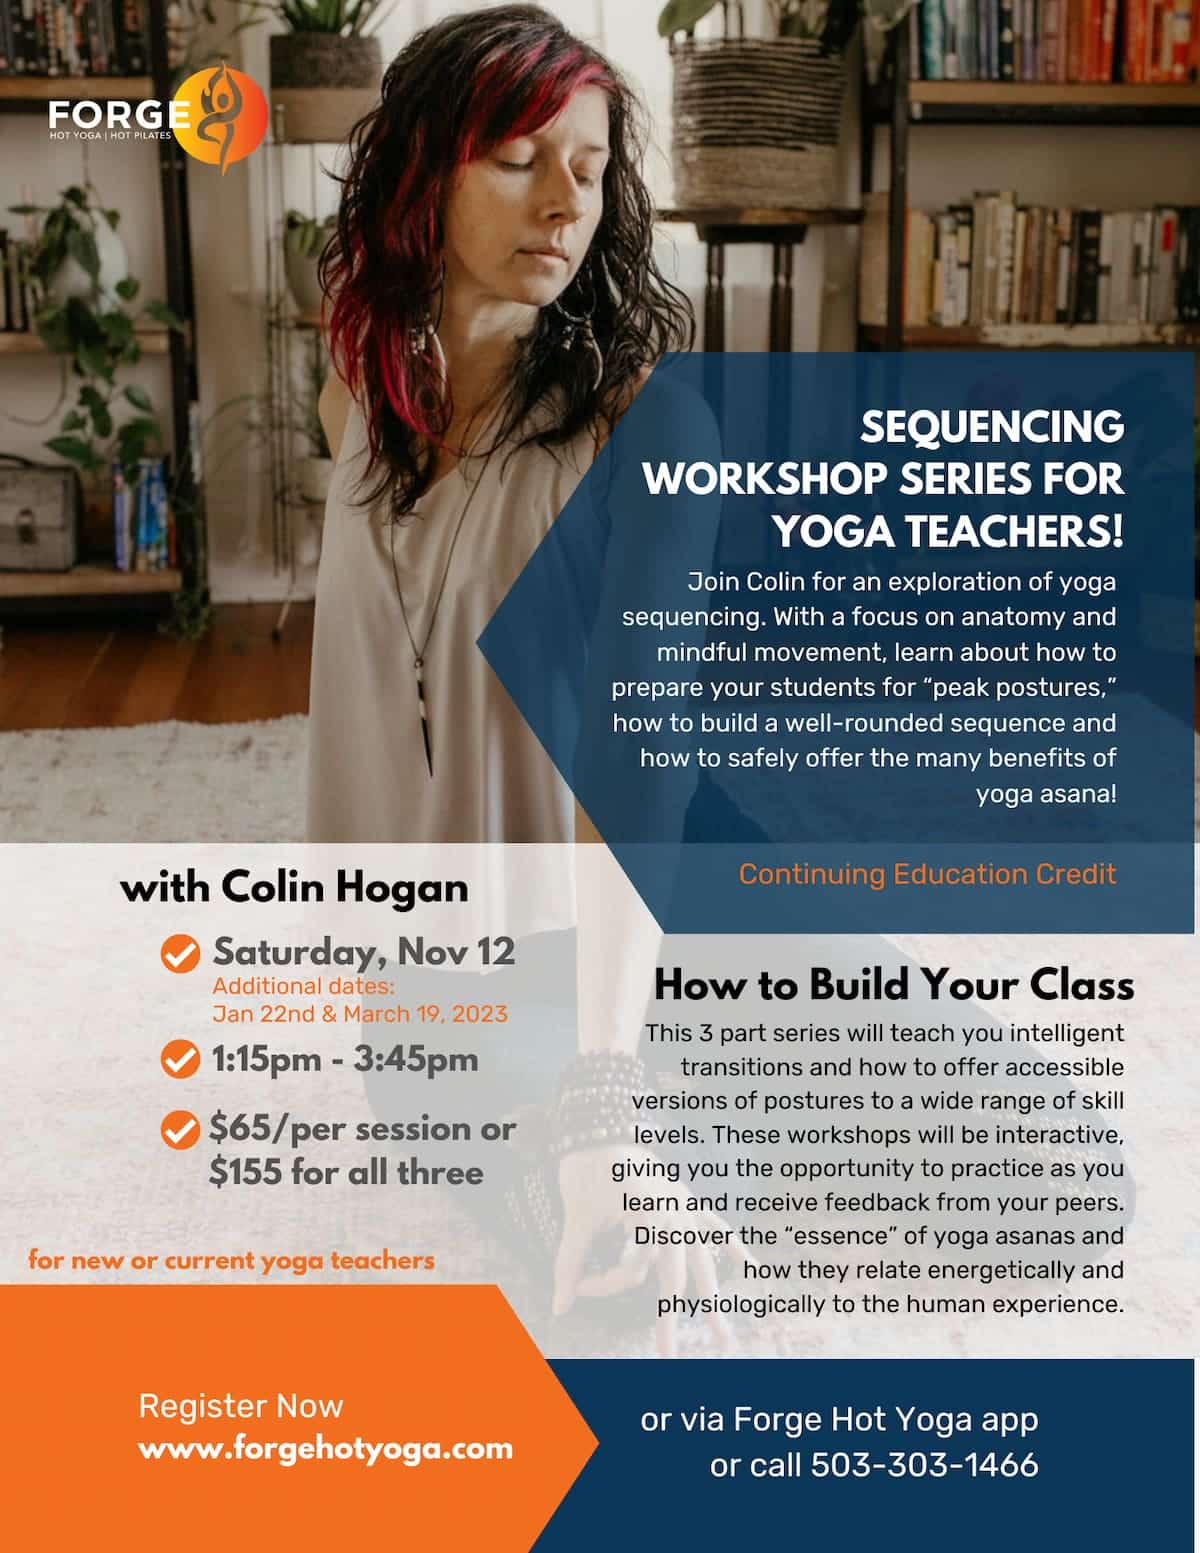 Sequencing Workshop Class for Yoga Teachers